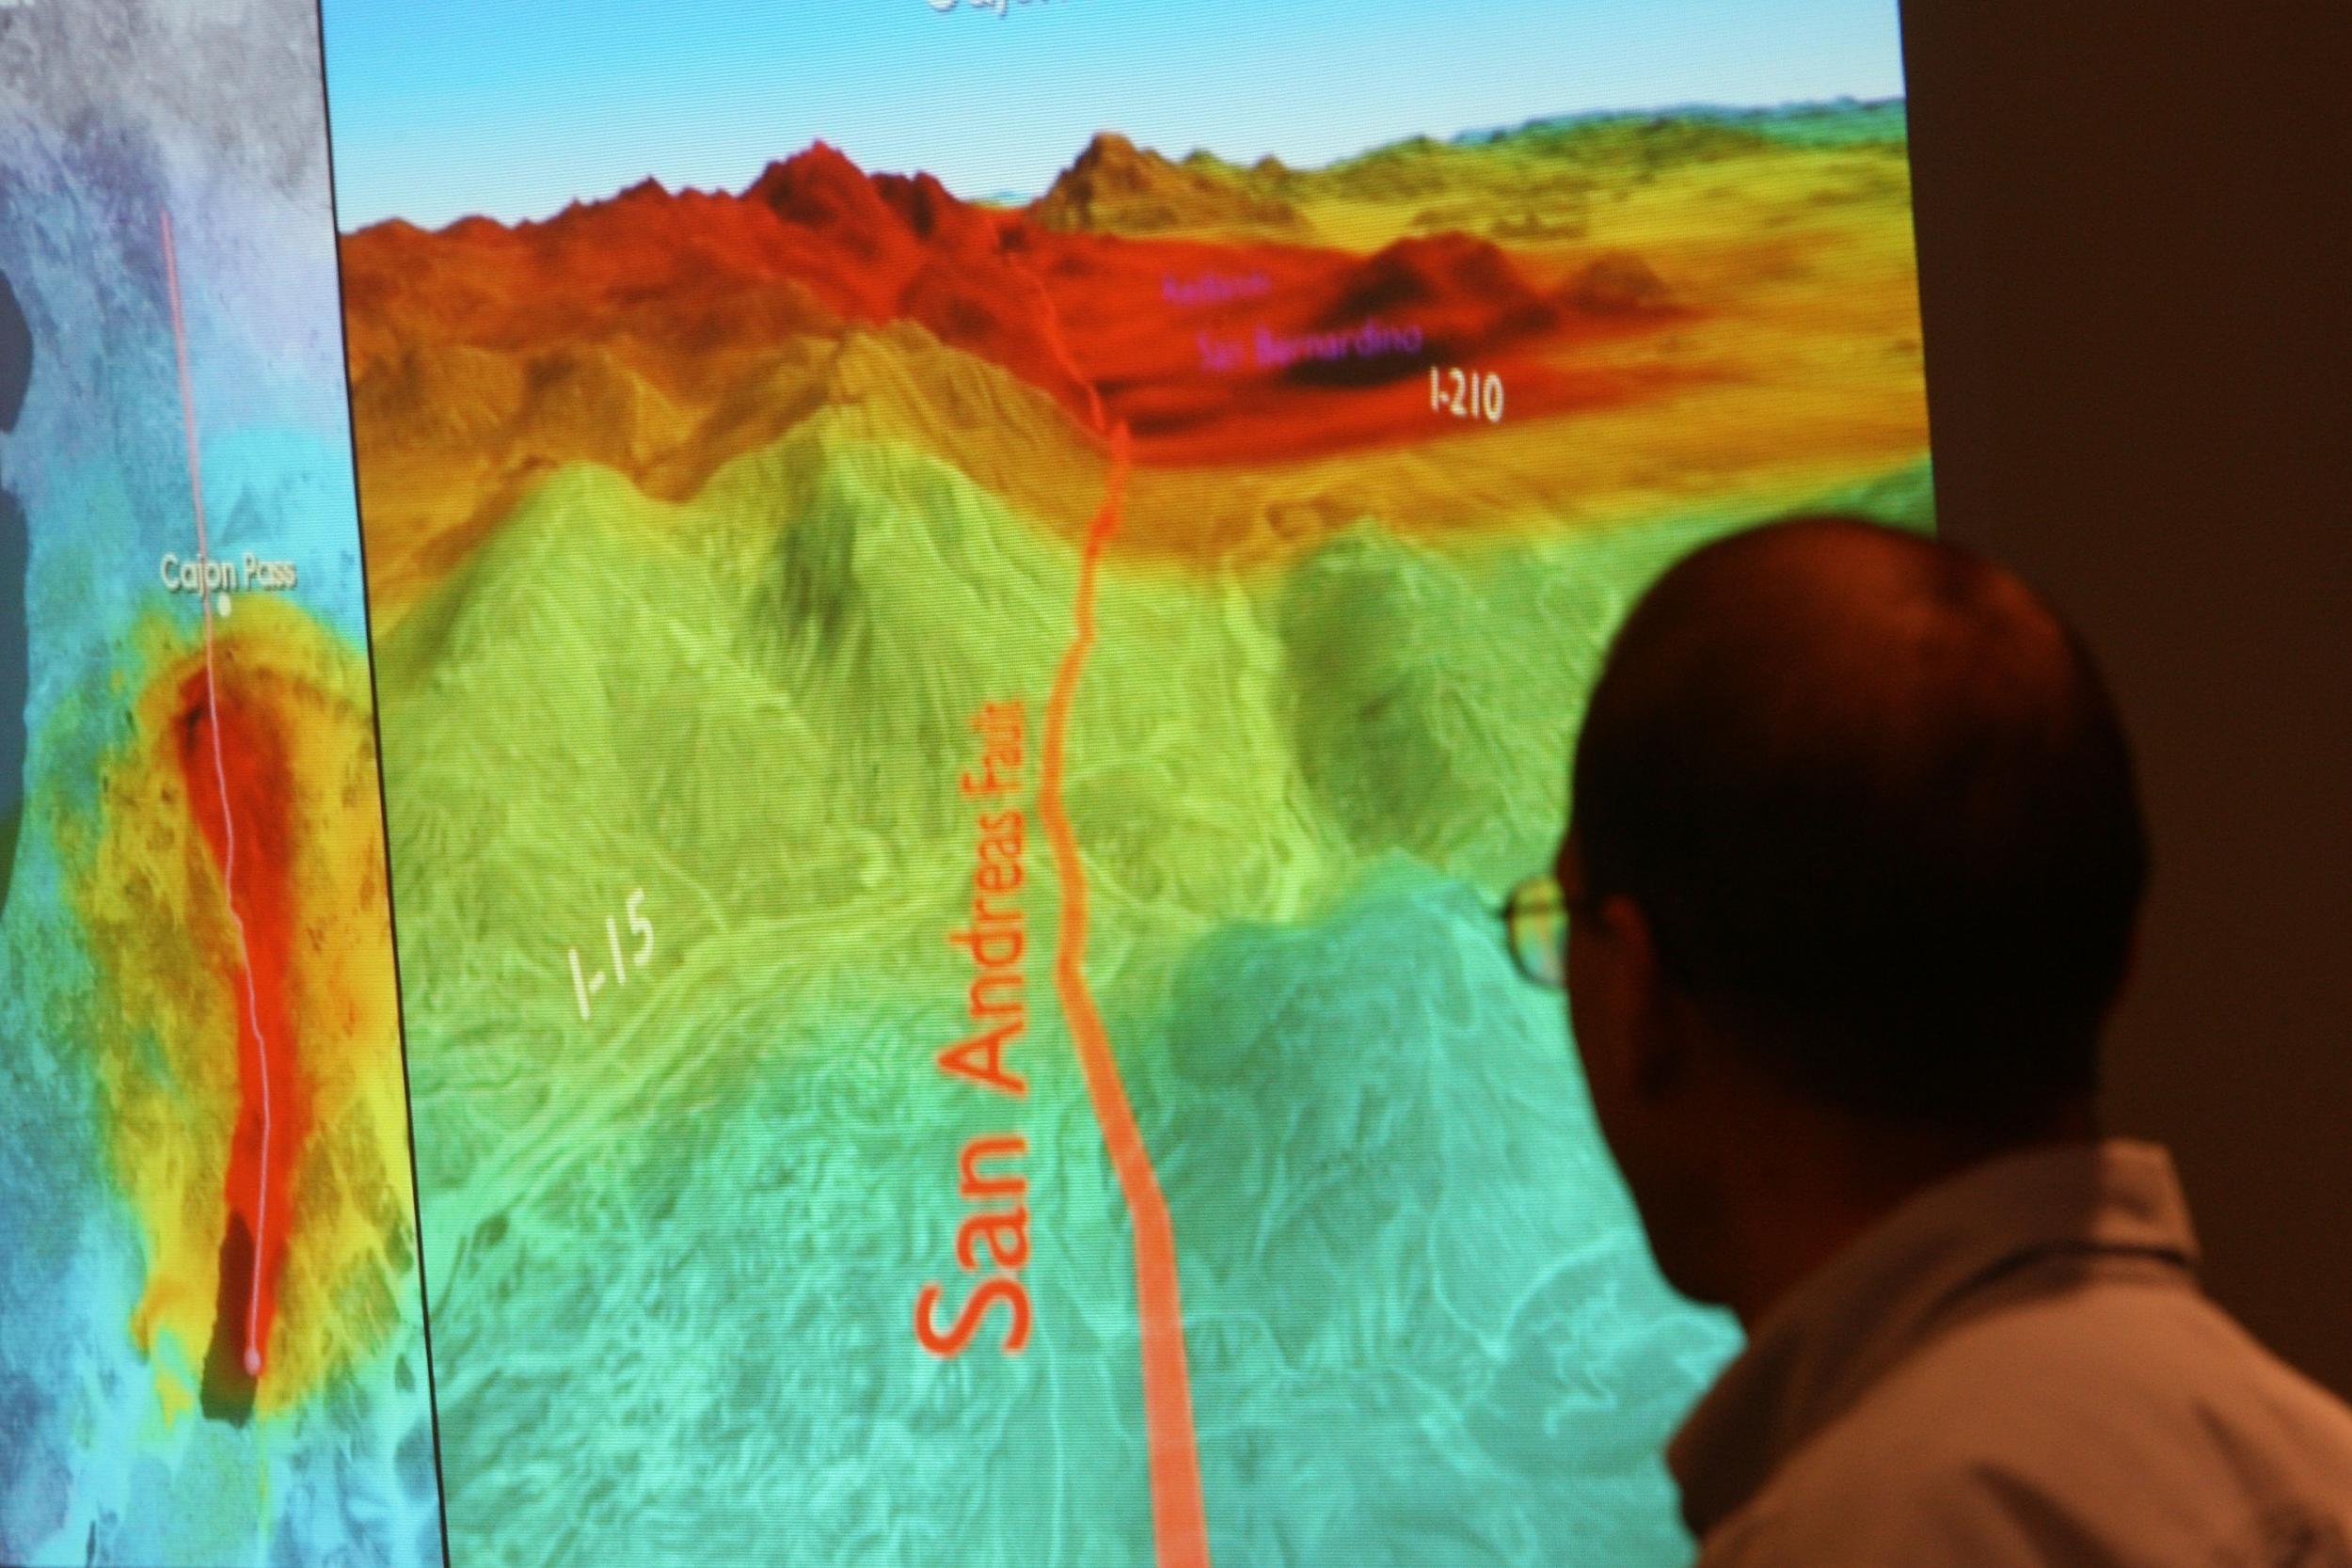 A computer model at the US Geological Survey illustrates how shock waves from a 7.8 magnitude earthquake on the San Andreas fault would affect southern California